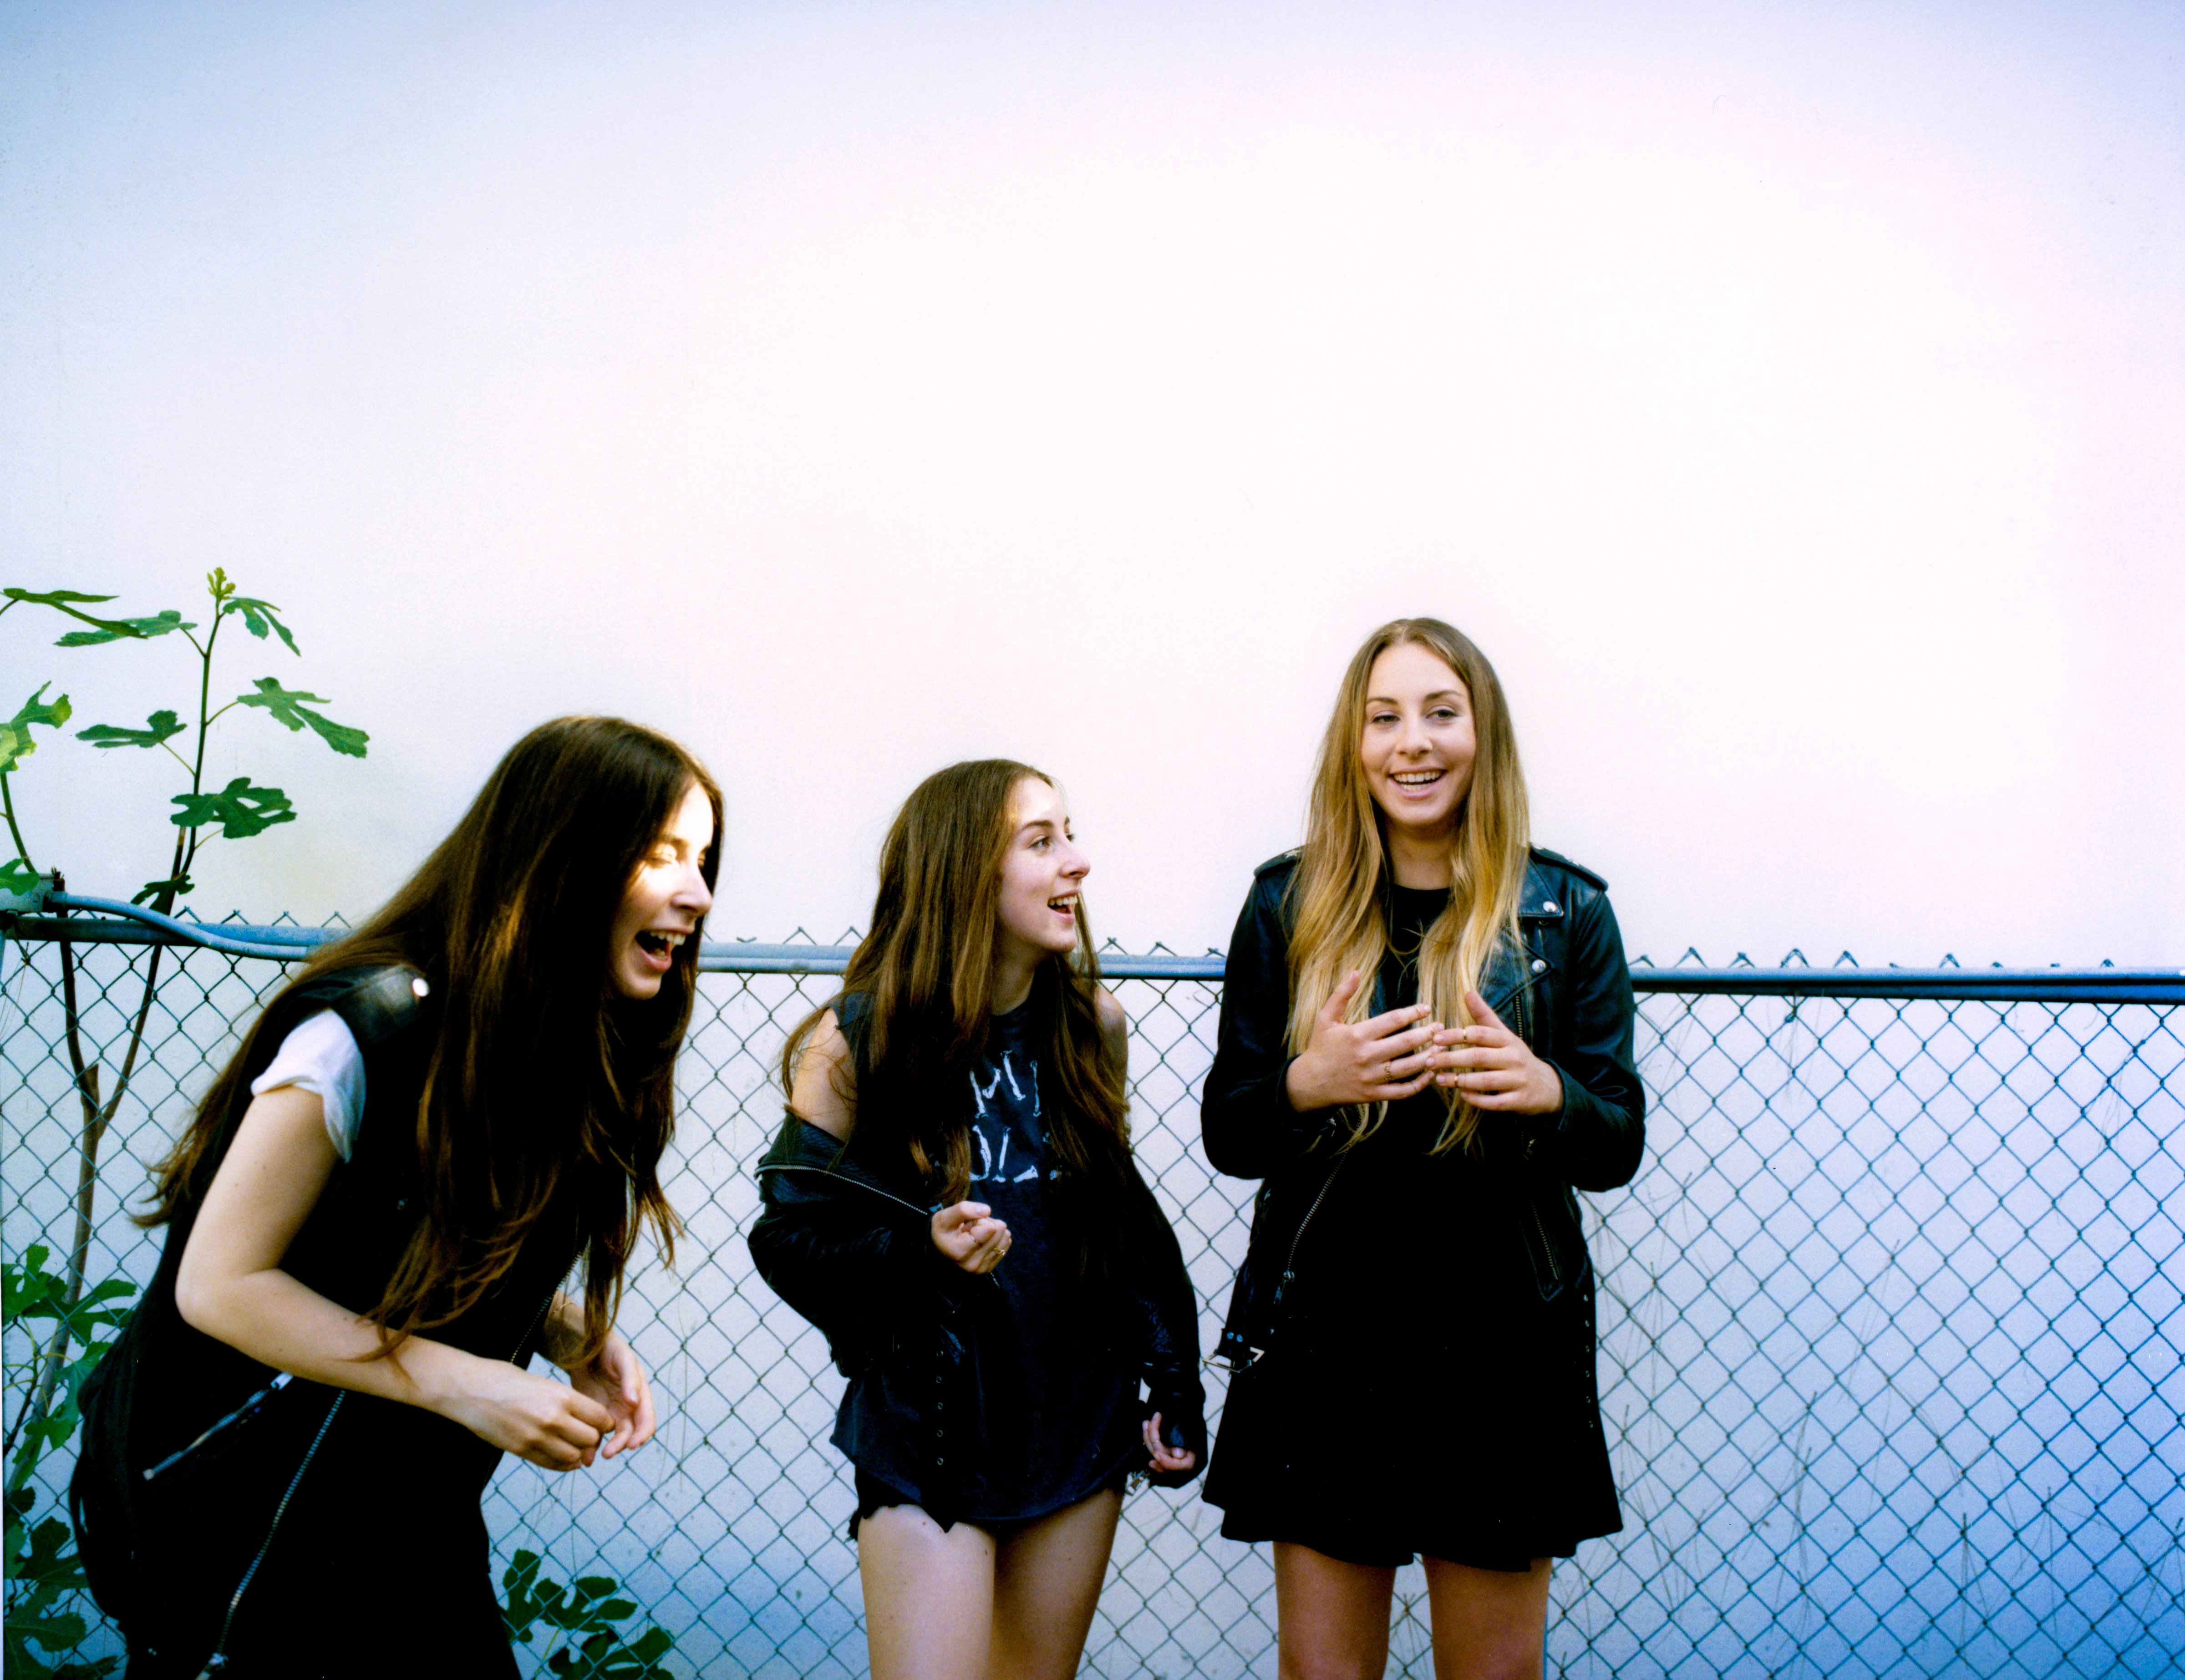 From left to right: Danielle, Alana and Este Haim.